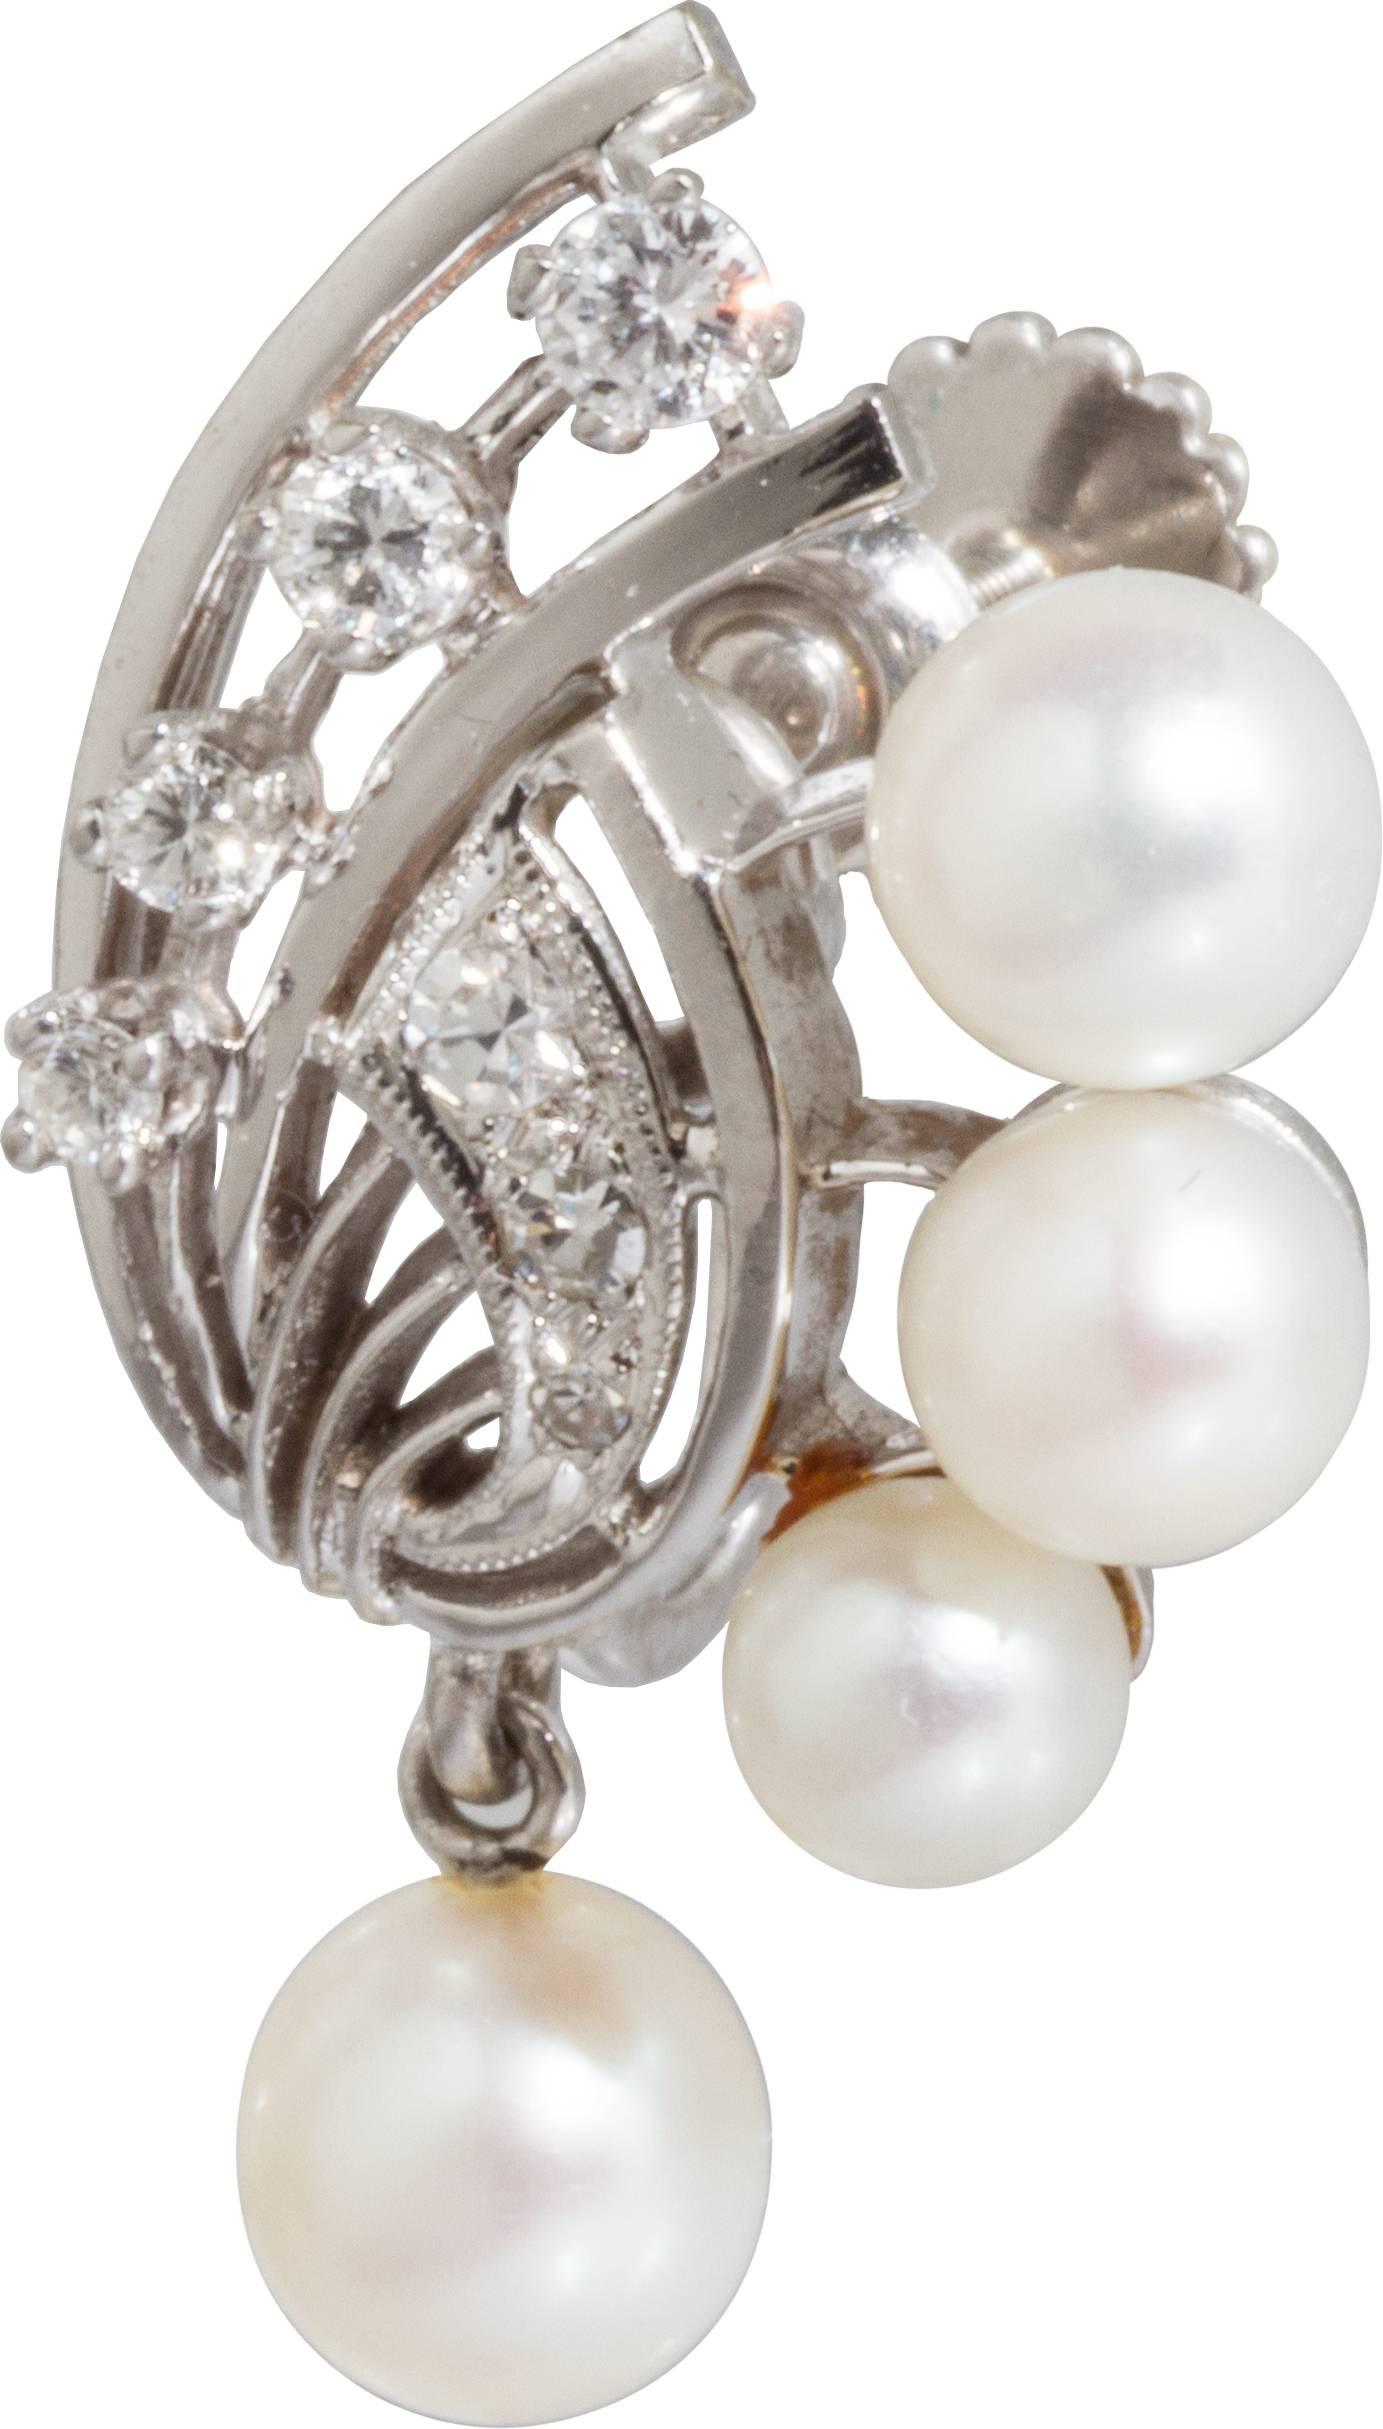 These sophisticated retro earrings incorporate three fixed mounted pearls and one dangling pearl at the bottom that adds movement to them. 
14kt white gold and diamonds complete the design.
They can easily be converted to pierced earrings.